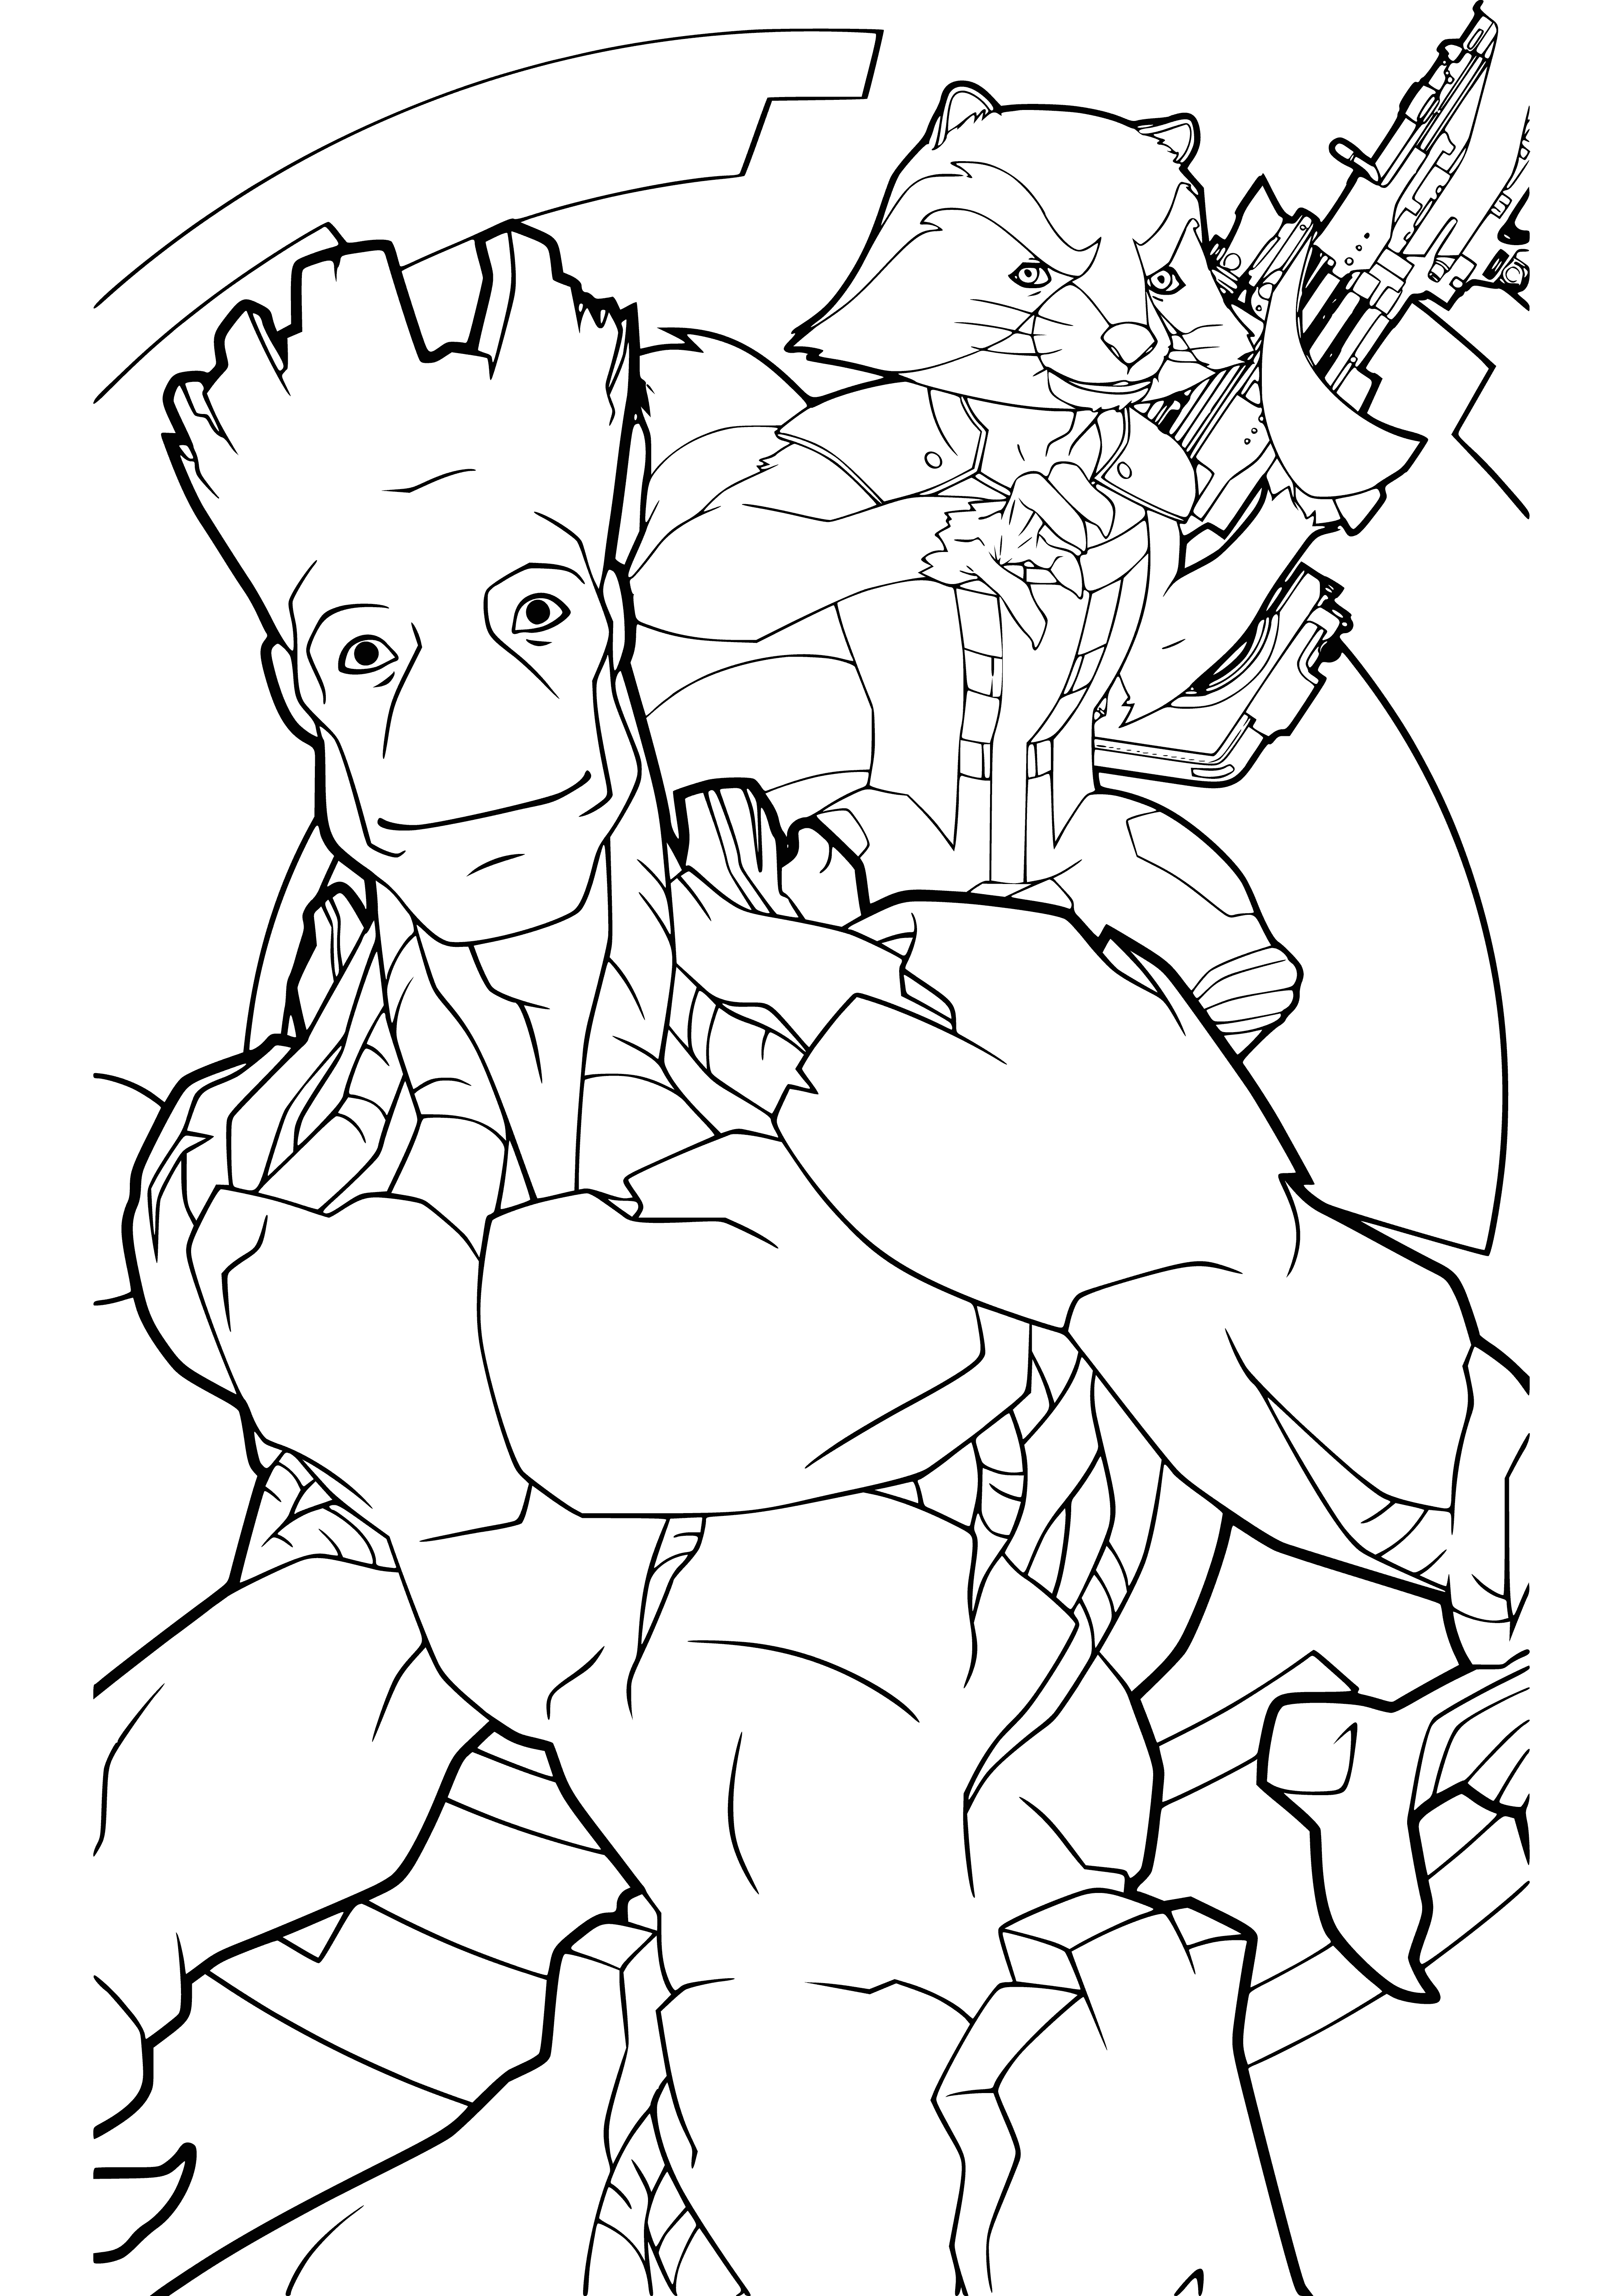 coloring page: Groot holds a terrified Rocket in his giant hand in the Guardians of the Galaxy coloring page.